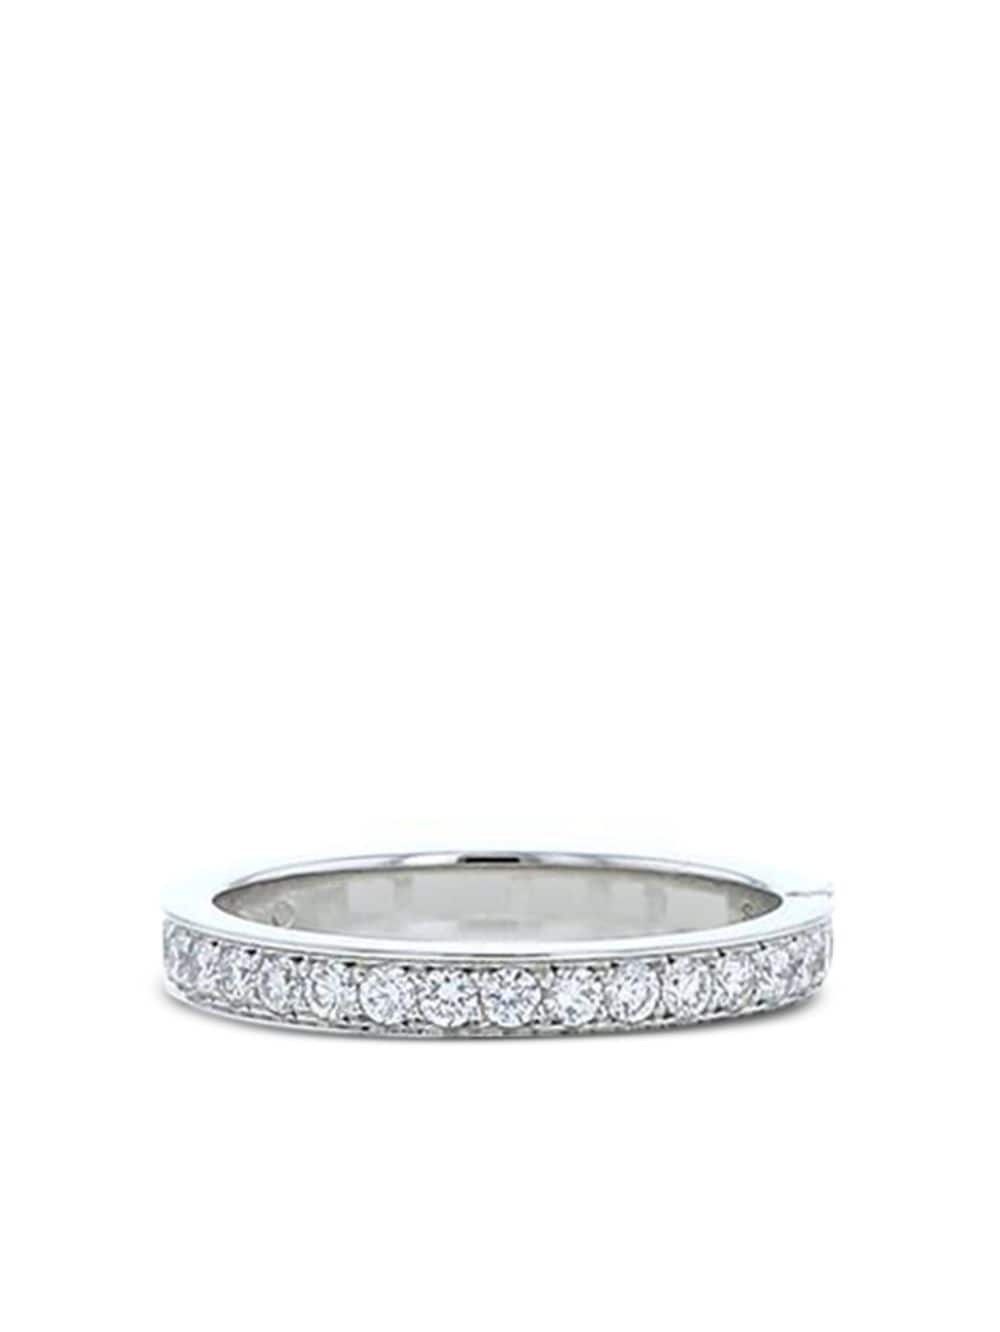 Fred pre-owned platinum For Love diamonds wedding ring - Silver